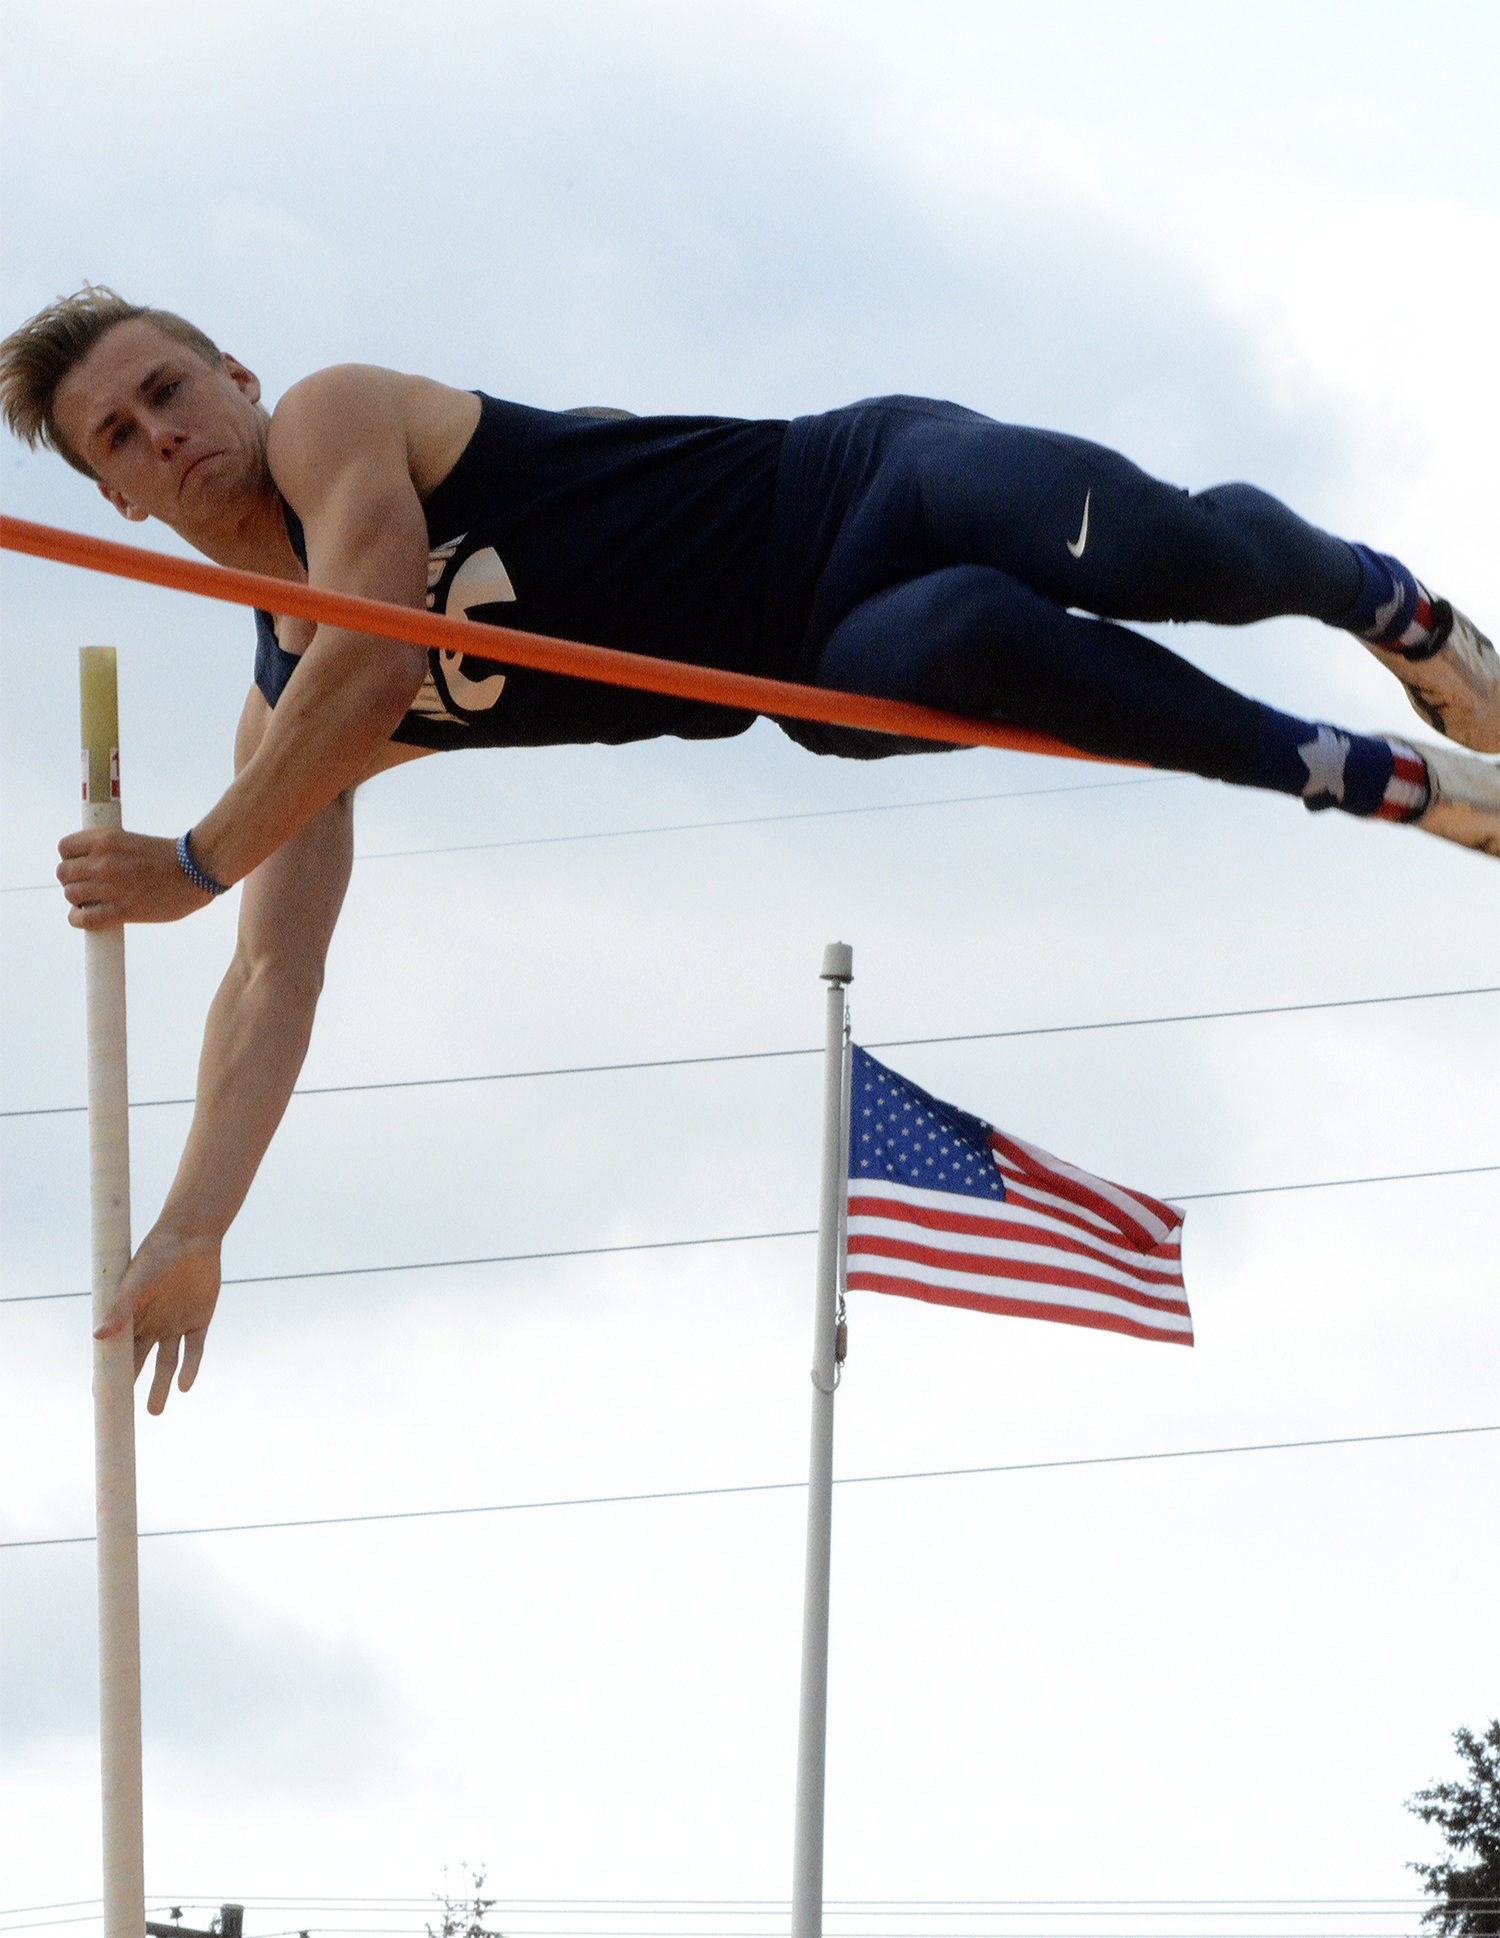 Arlington pole vaulter junior Wyatt Hawthorne barely nicks the bar on one of his attempts. He placed 12th at state in the finals at 13 meters.